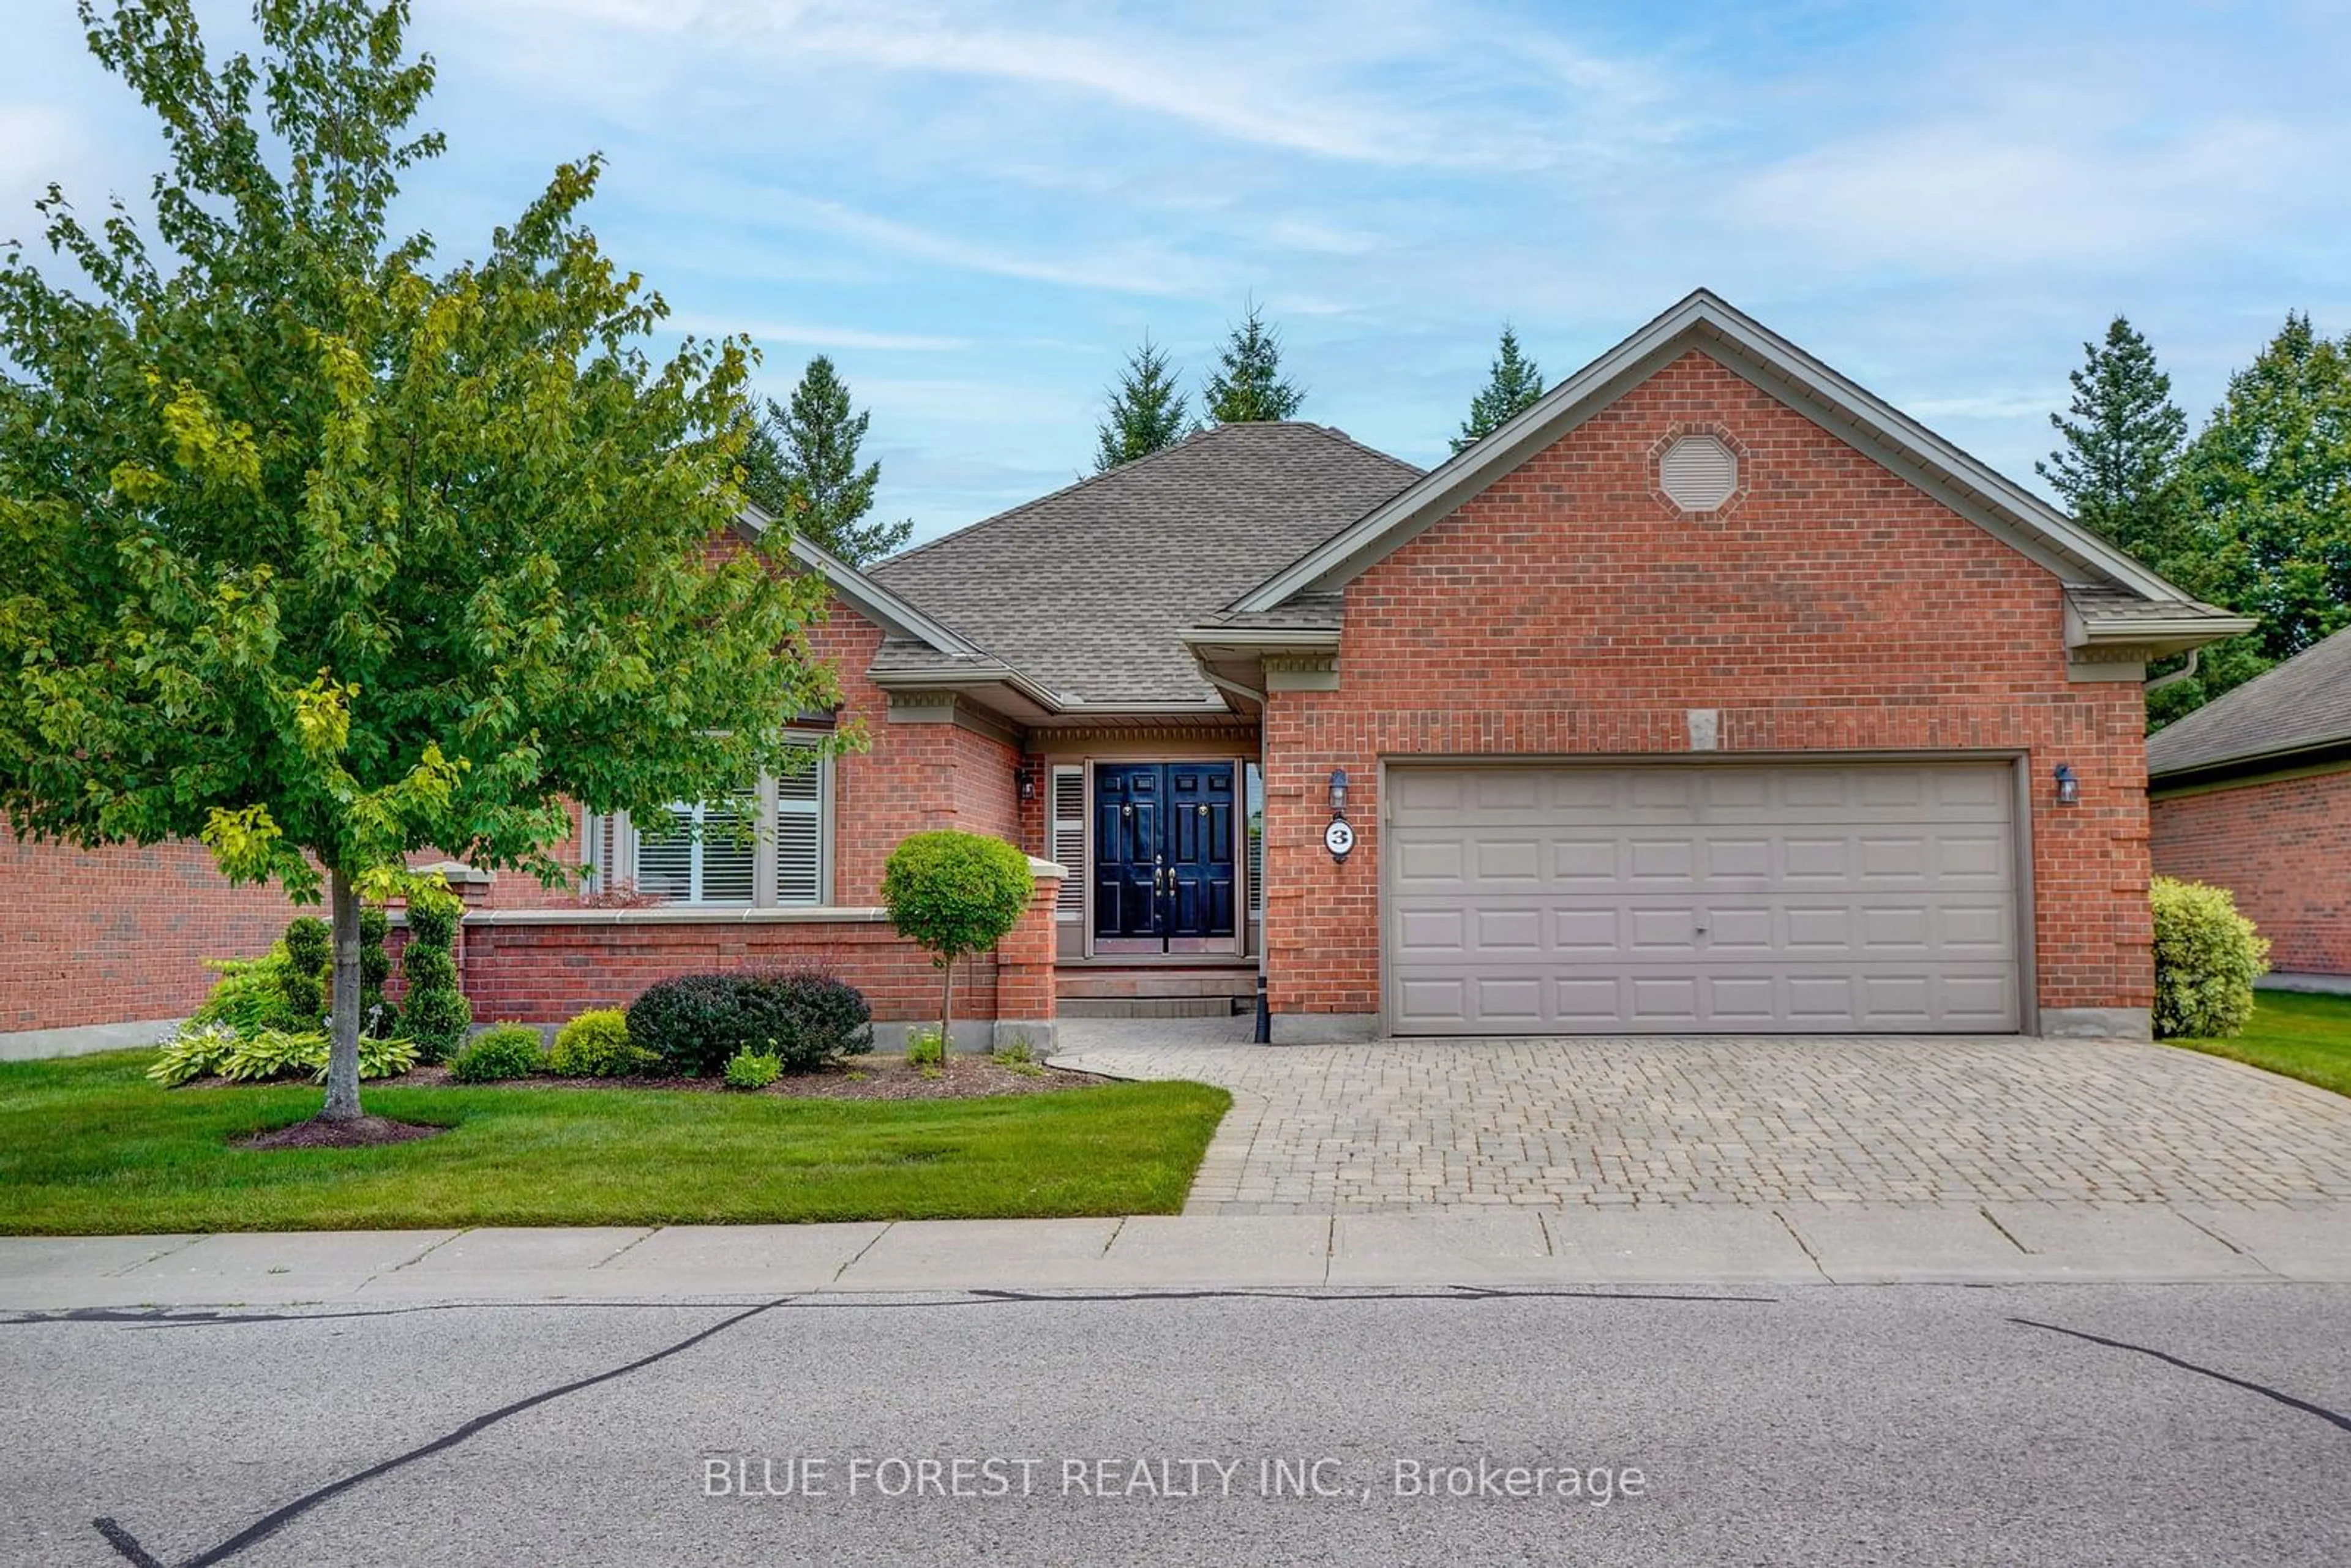 Home with brick exterior material for 50 Northumberland Rd #3, London Ontario N6H 5J2